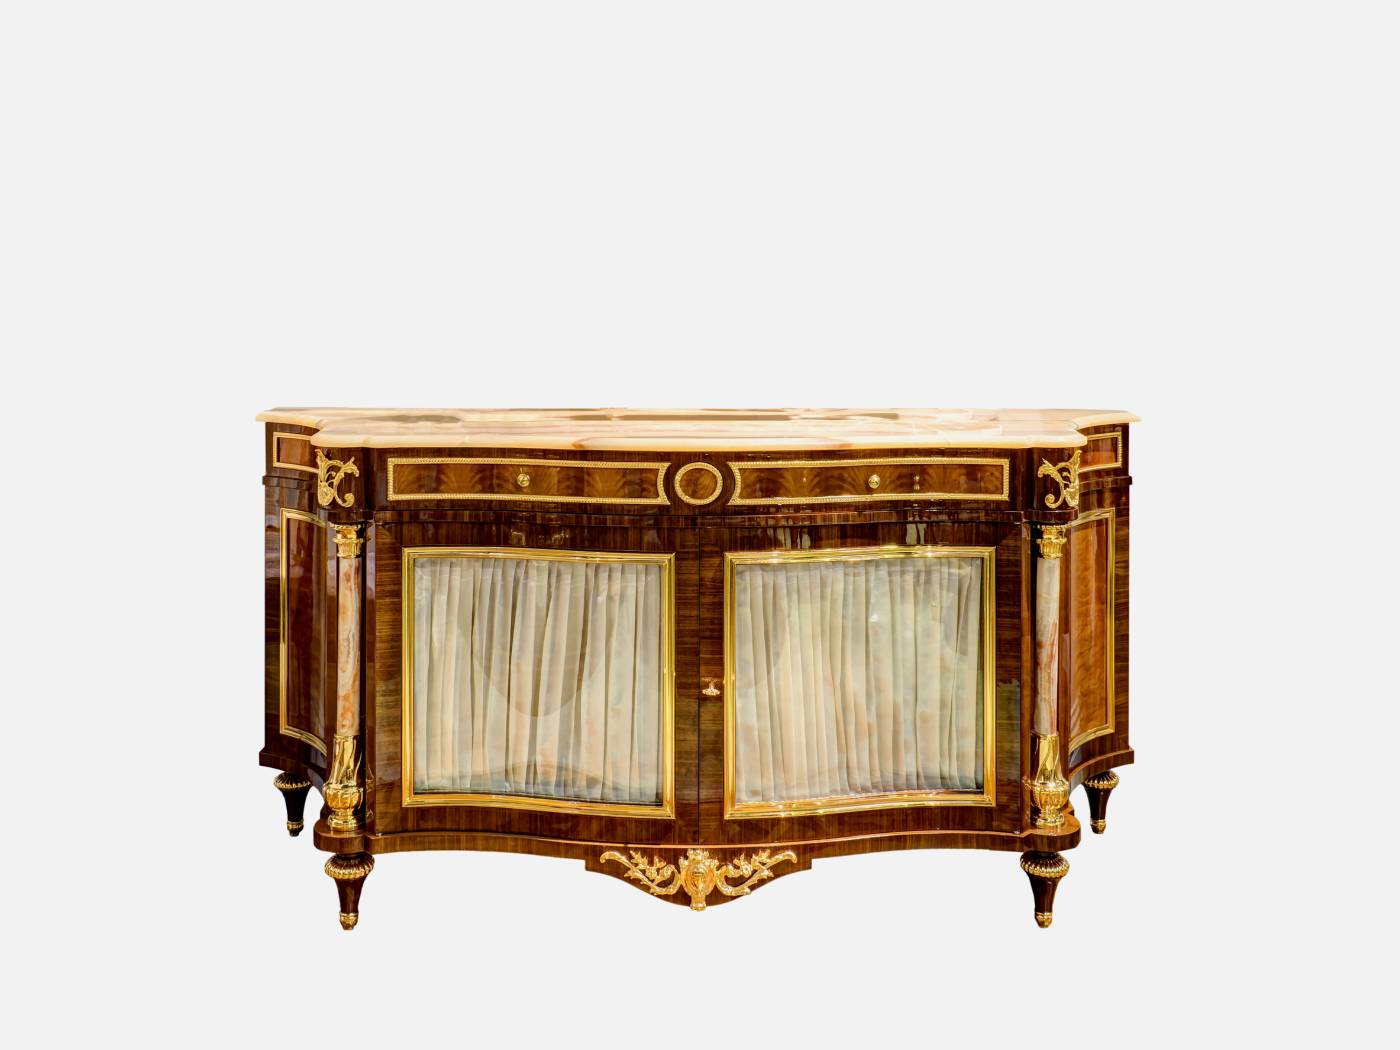 ART. 2073 – Discover the elegance of luxury classic Sideboards made in Italy by C.G. Capelletti. Luxury classic furniture that combines style and craftsmanship.